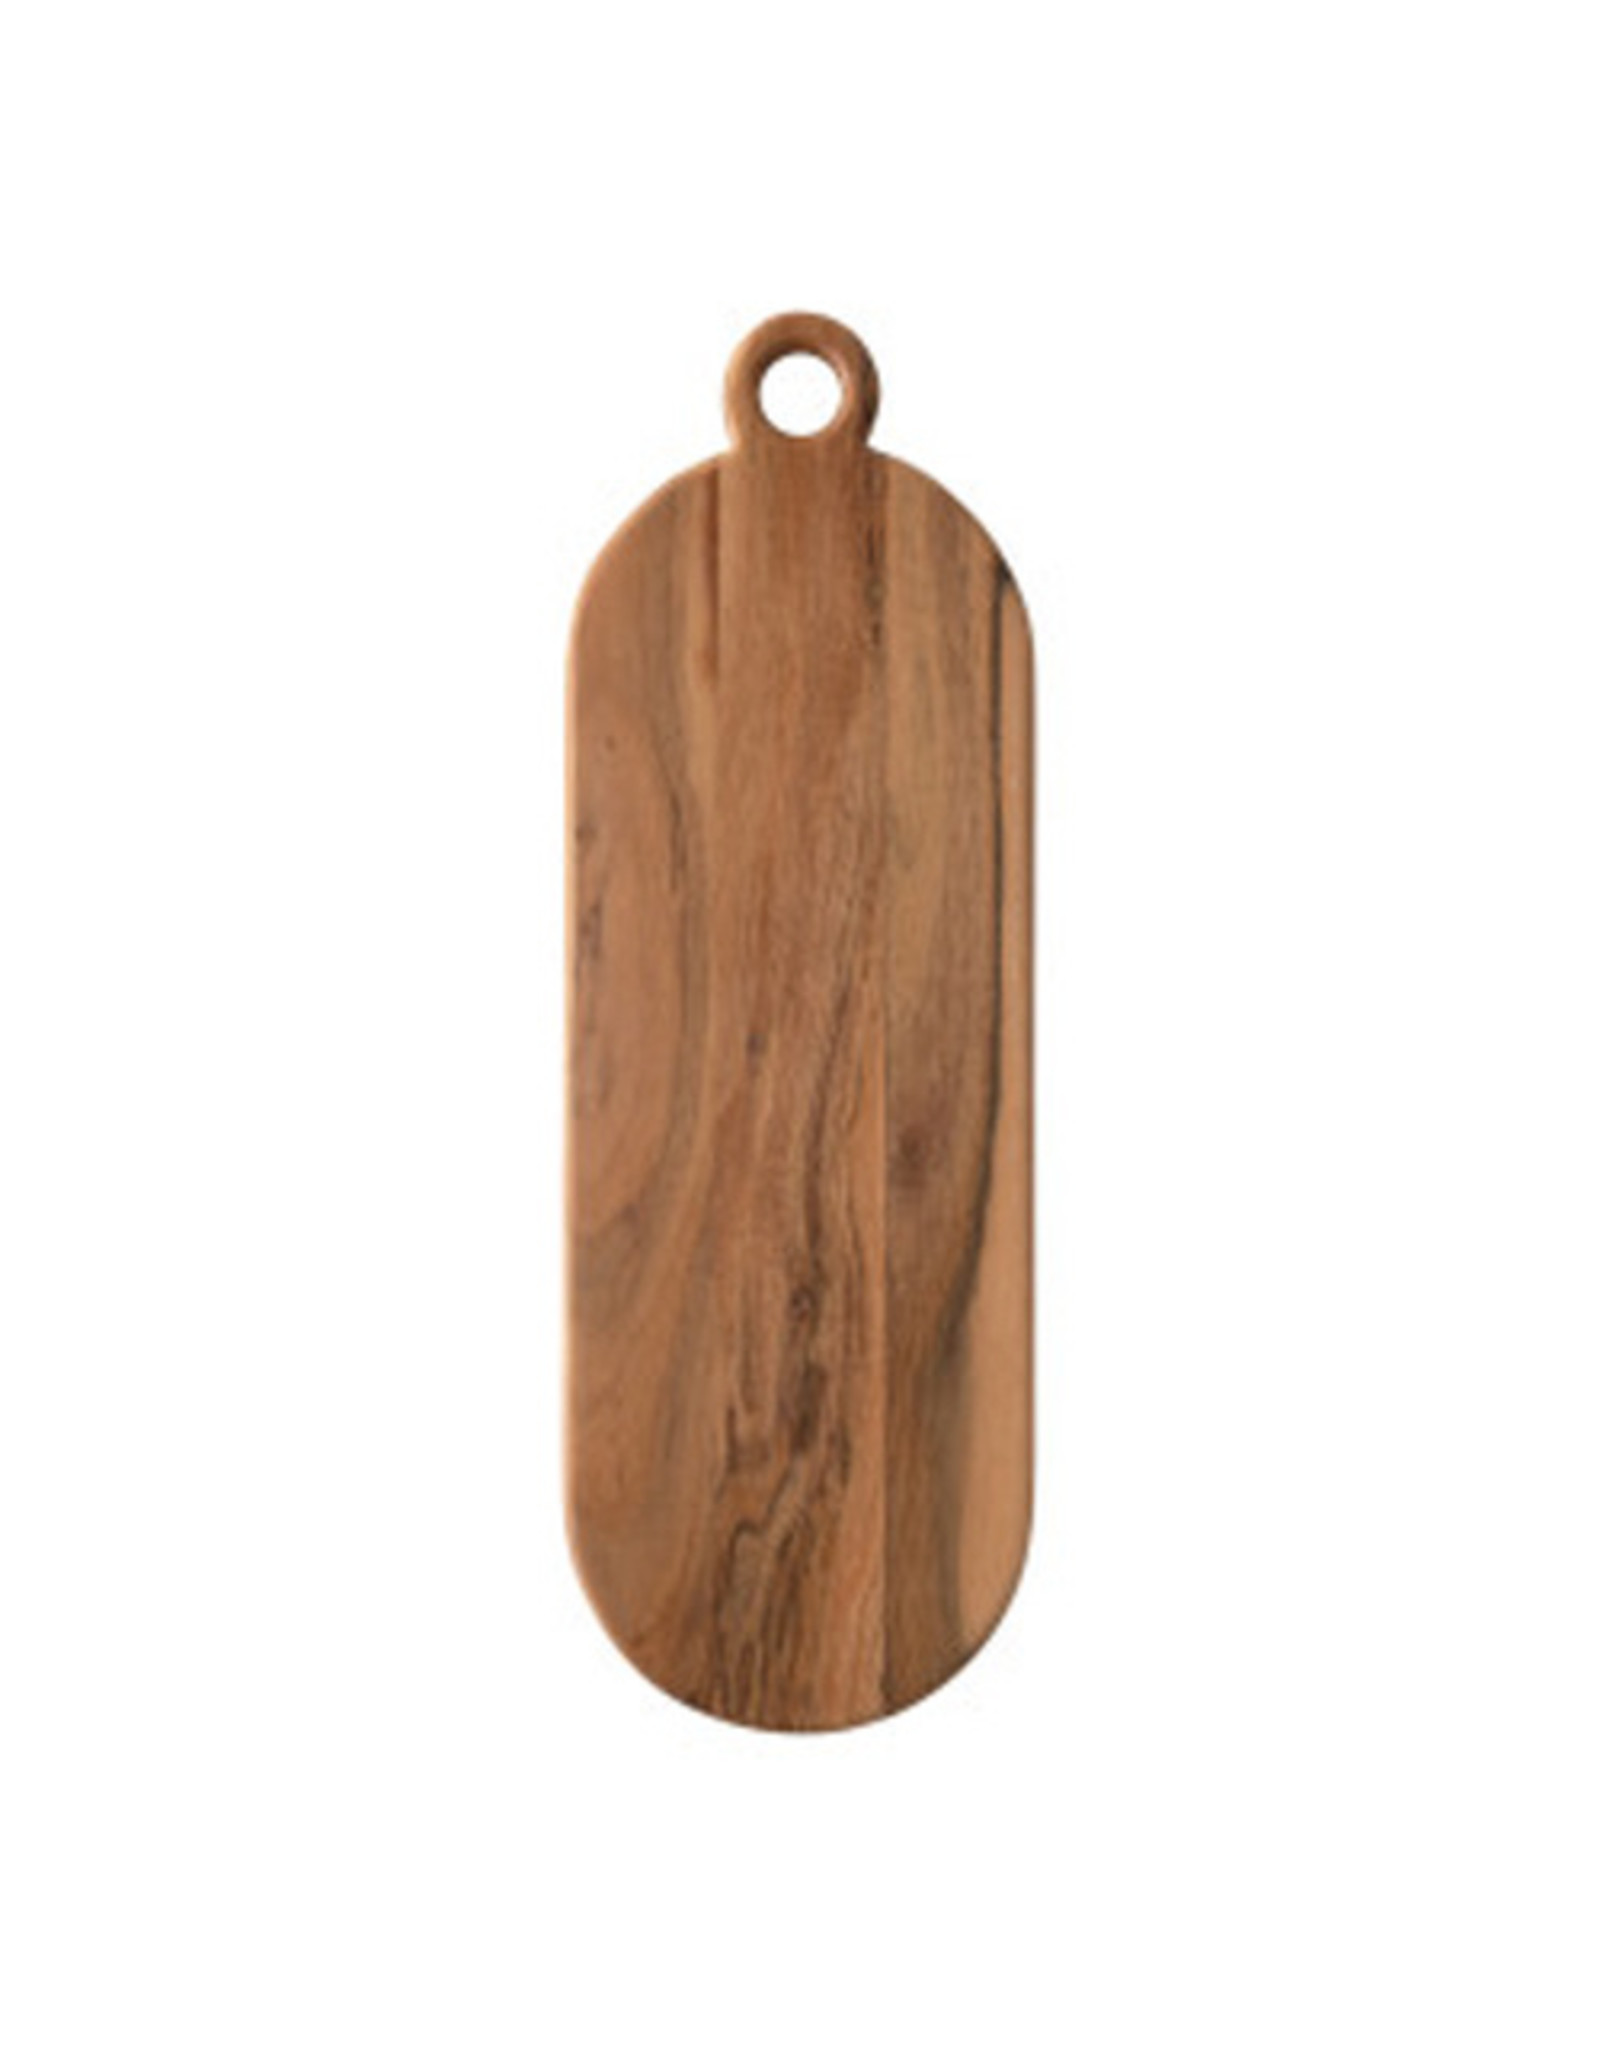 Wooden Cheese Board With Round Handle, Round Wooden Cheese Board With Handle